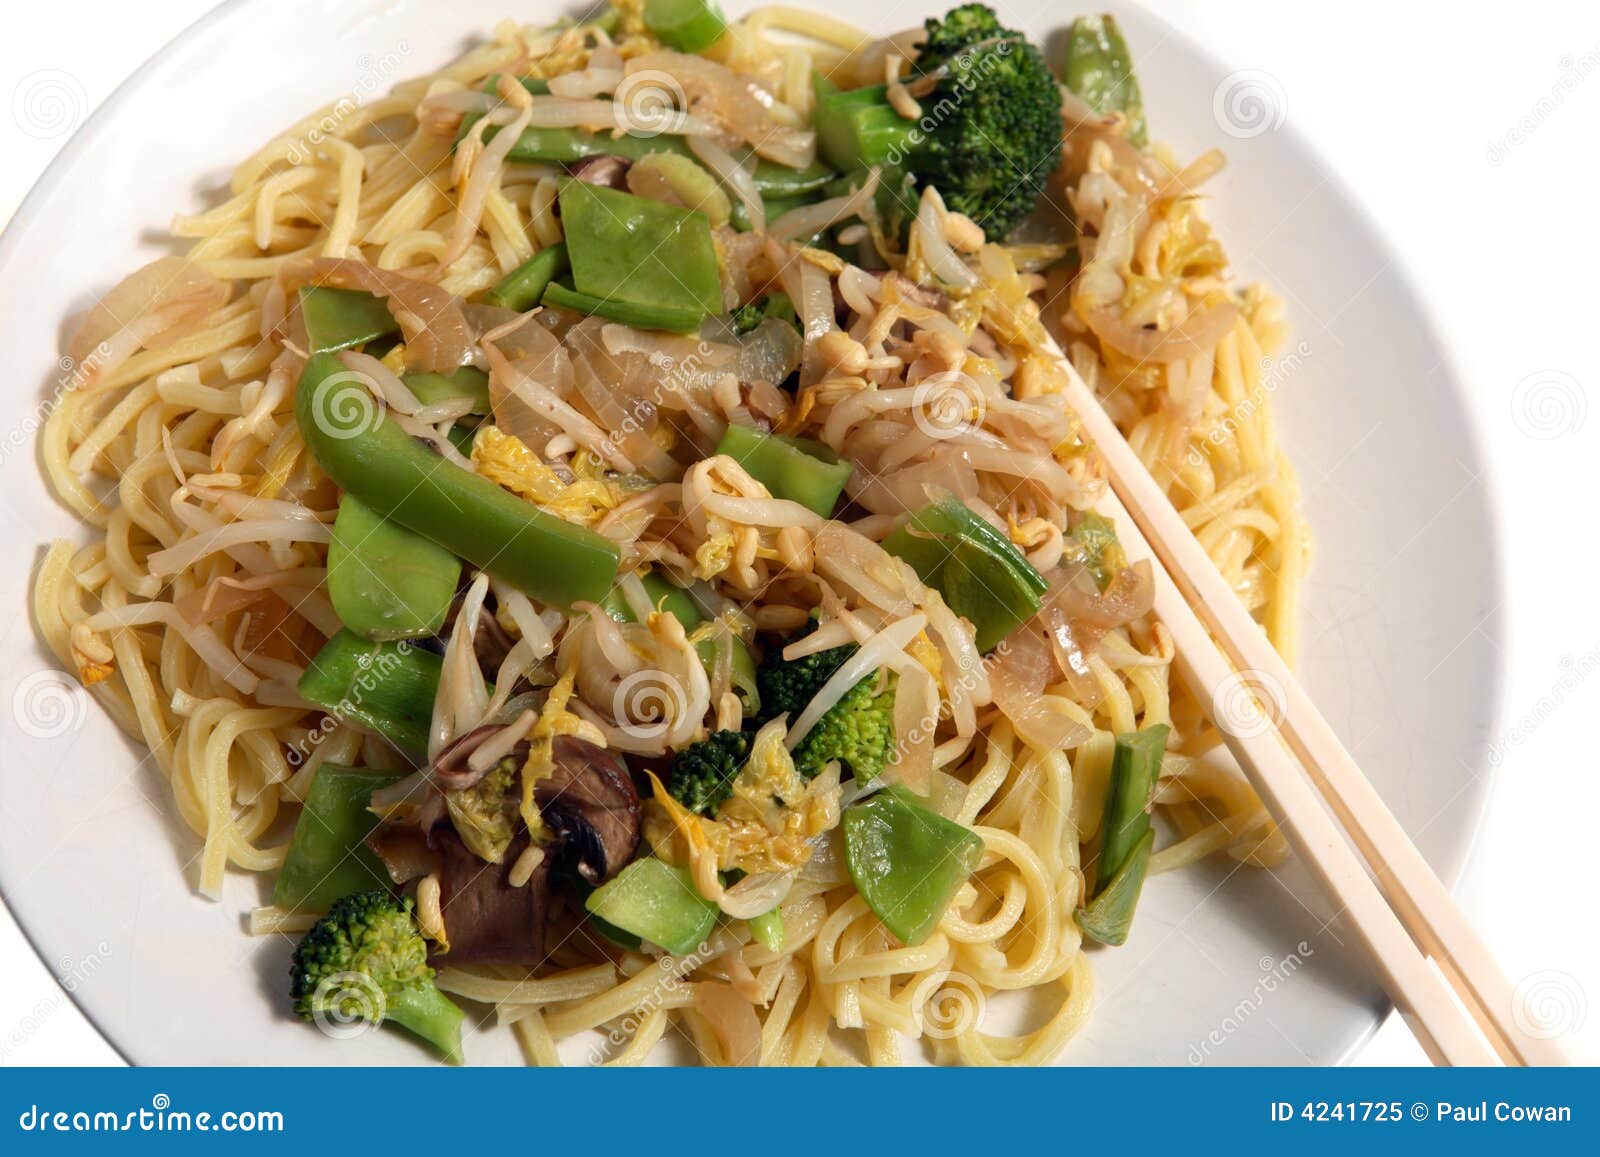 Vegetarian Chow Mein Noodles Meal Stock Image - Image of chopsticks ...